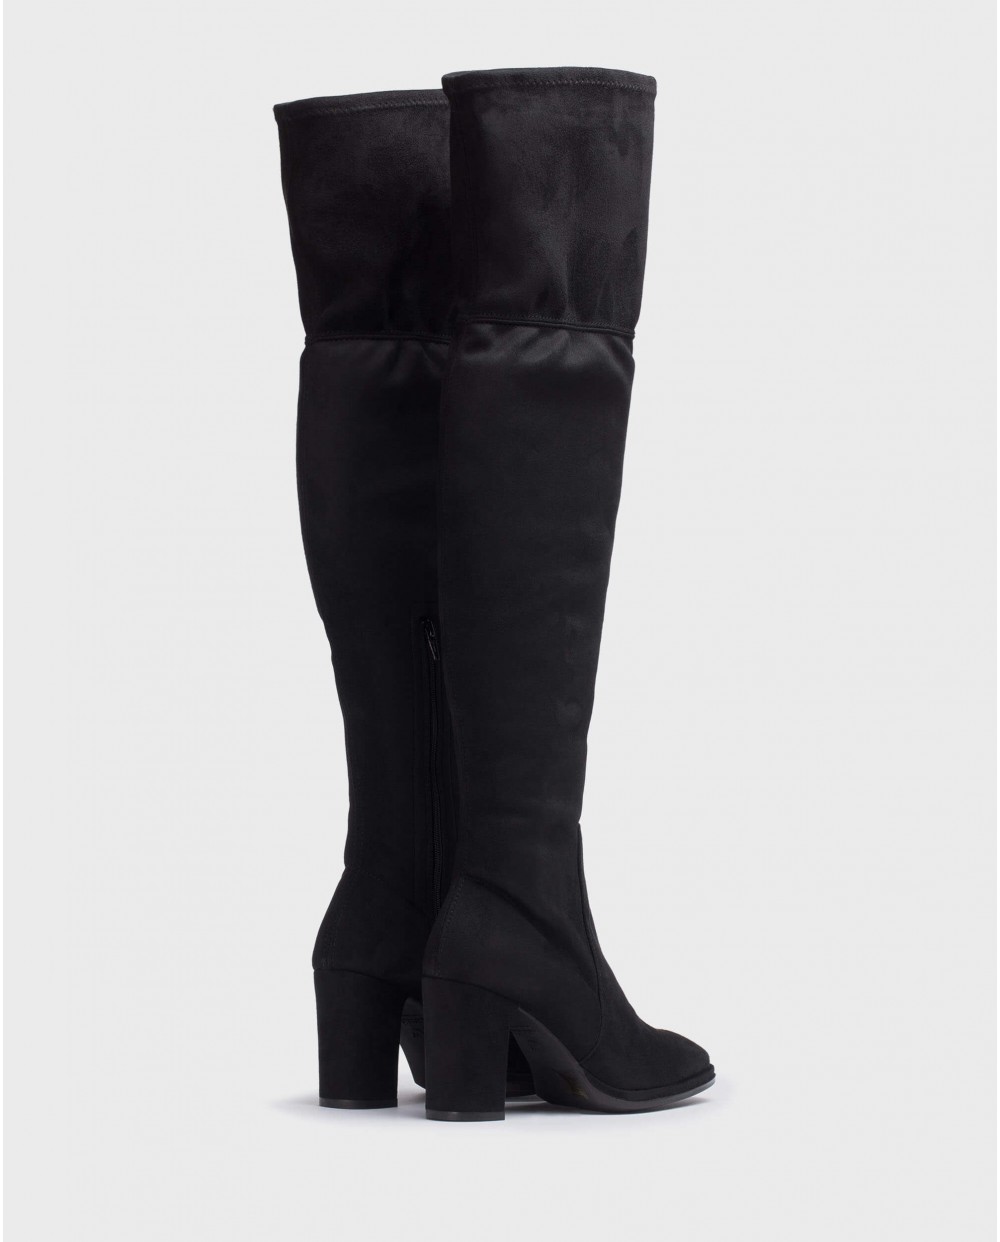 Wonders-Boots-\nAuster black over the knee boot